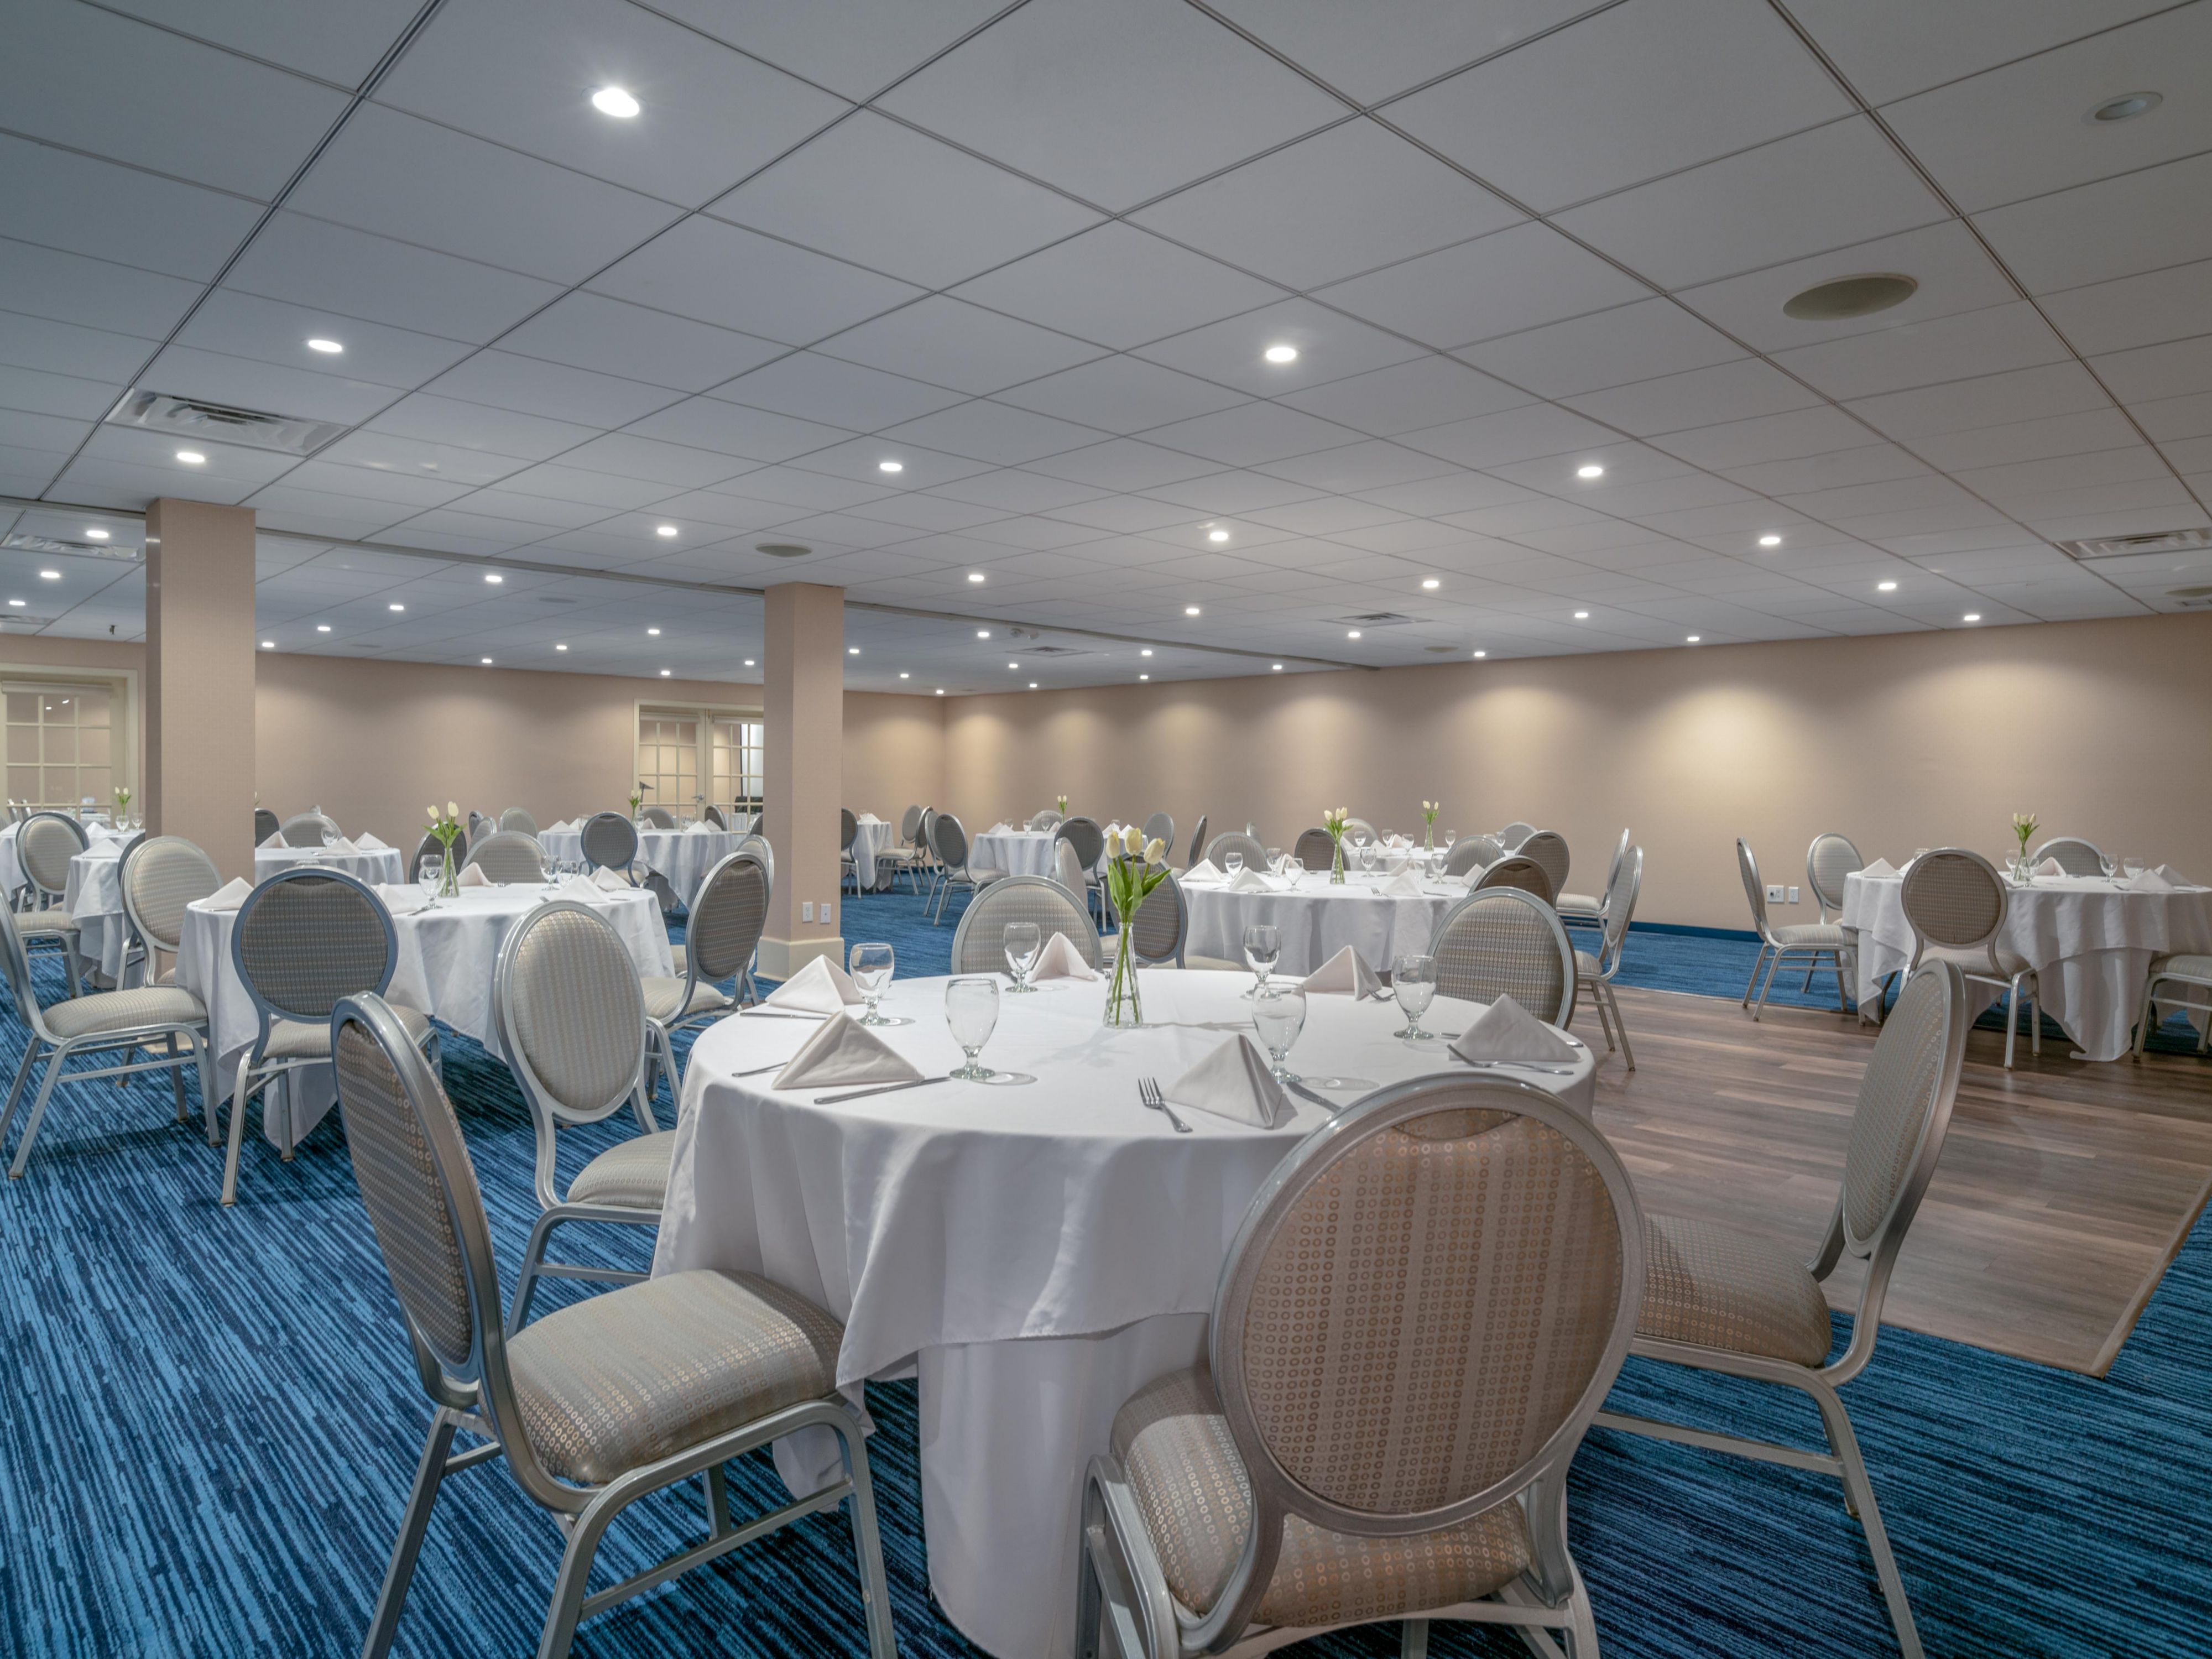 Plan your next meeting or event at the Holiday Inn Cape Cod - Hyannis featuring over 6,000 square feet of versatile meeting space for small or large groups.